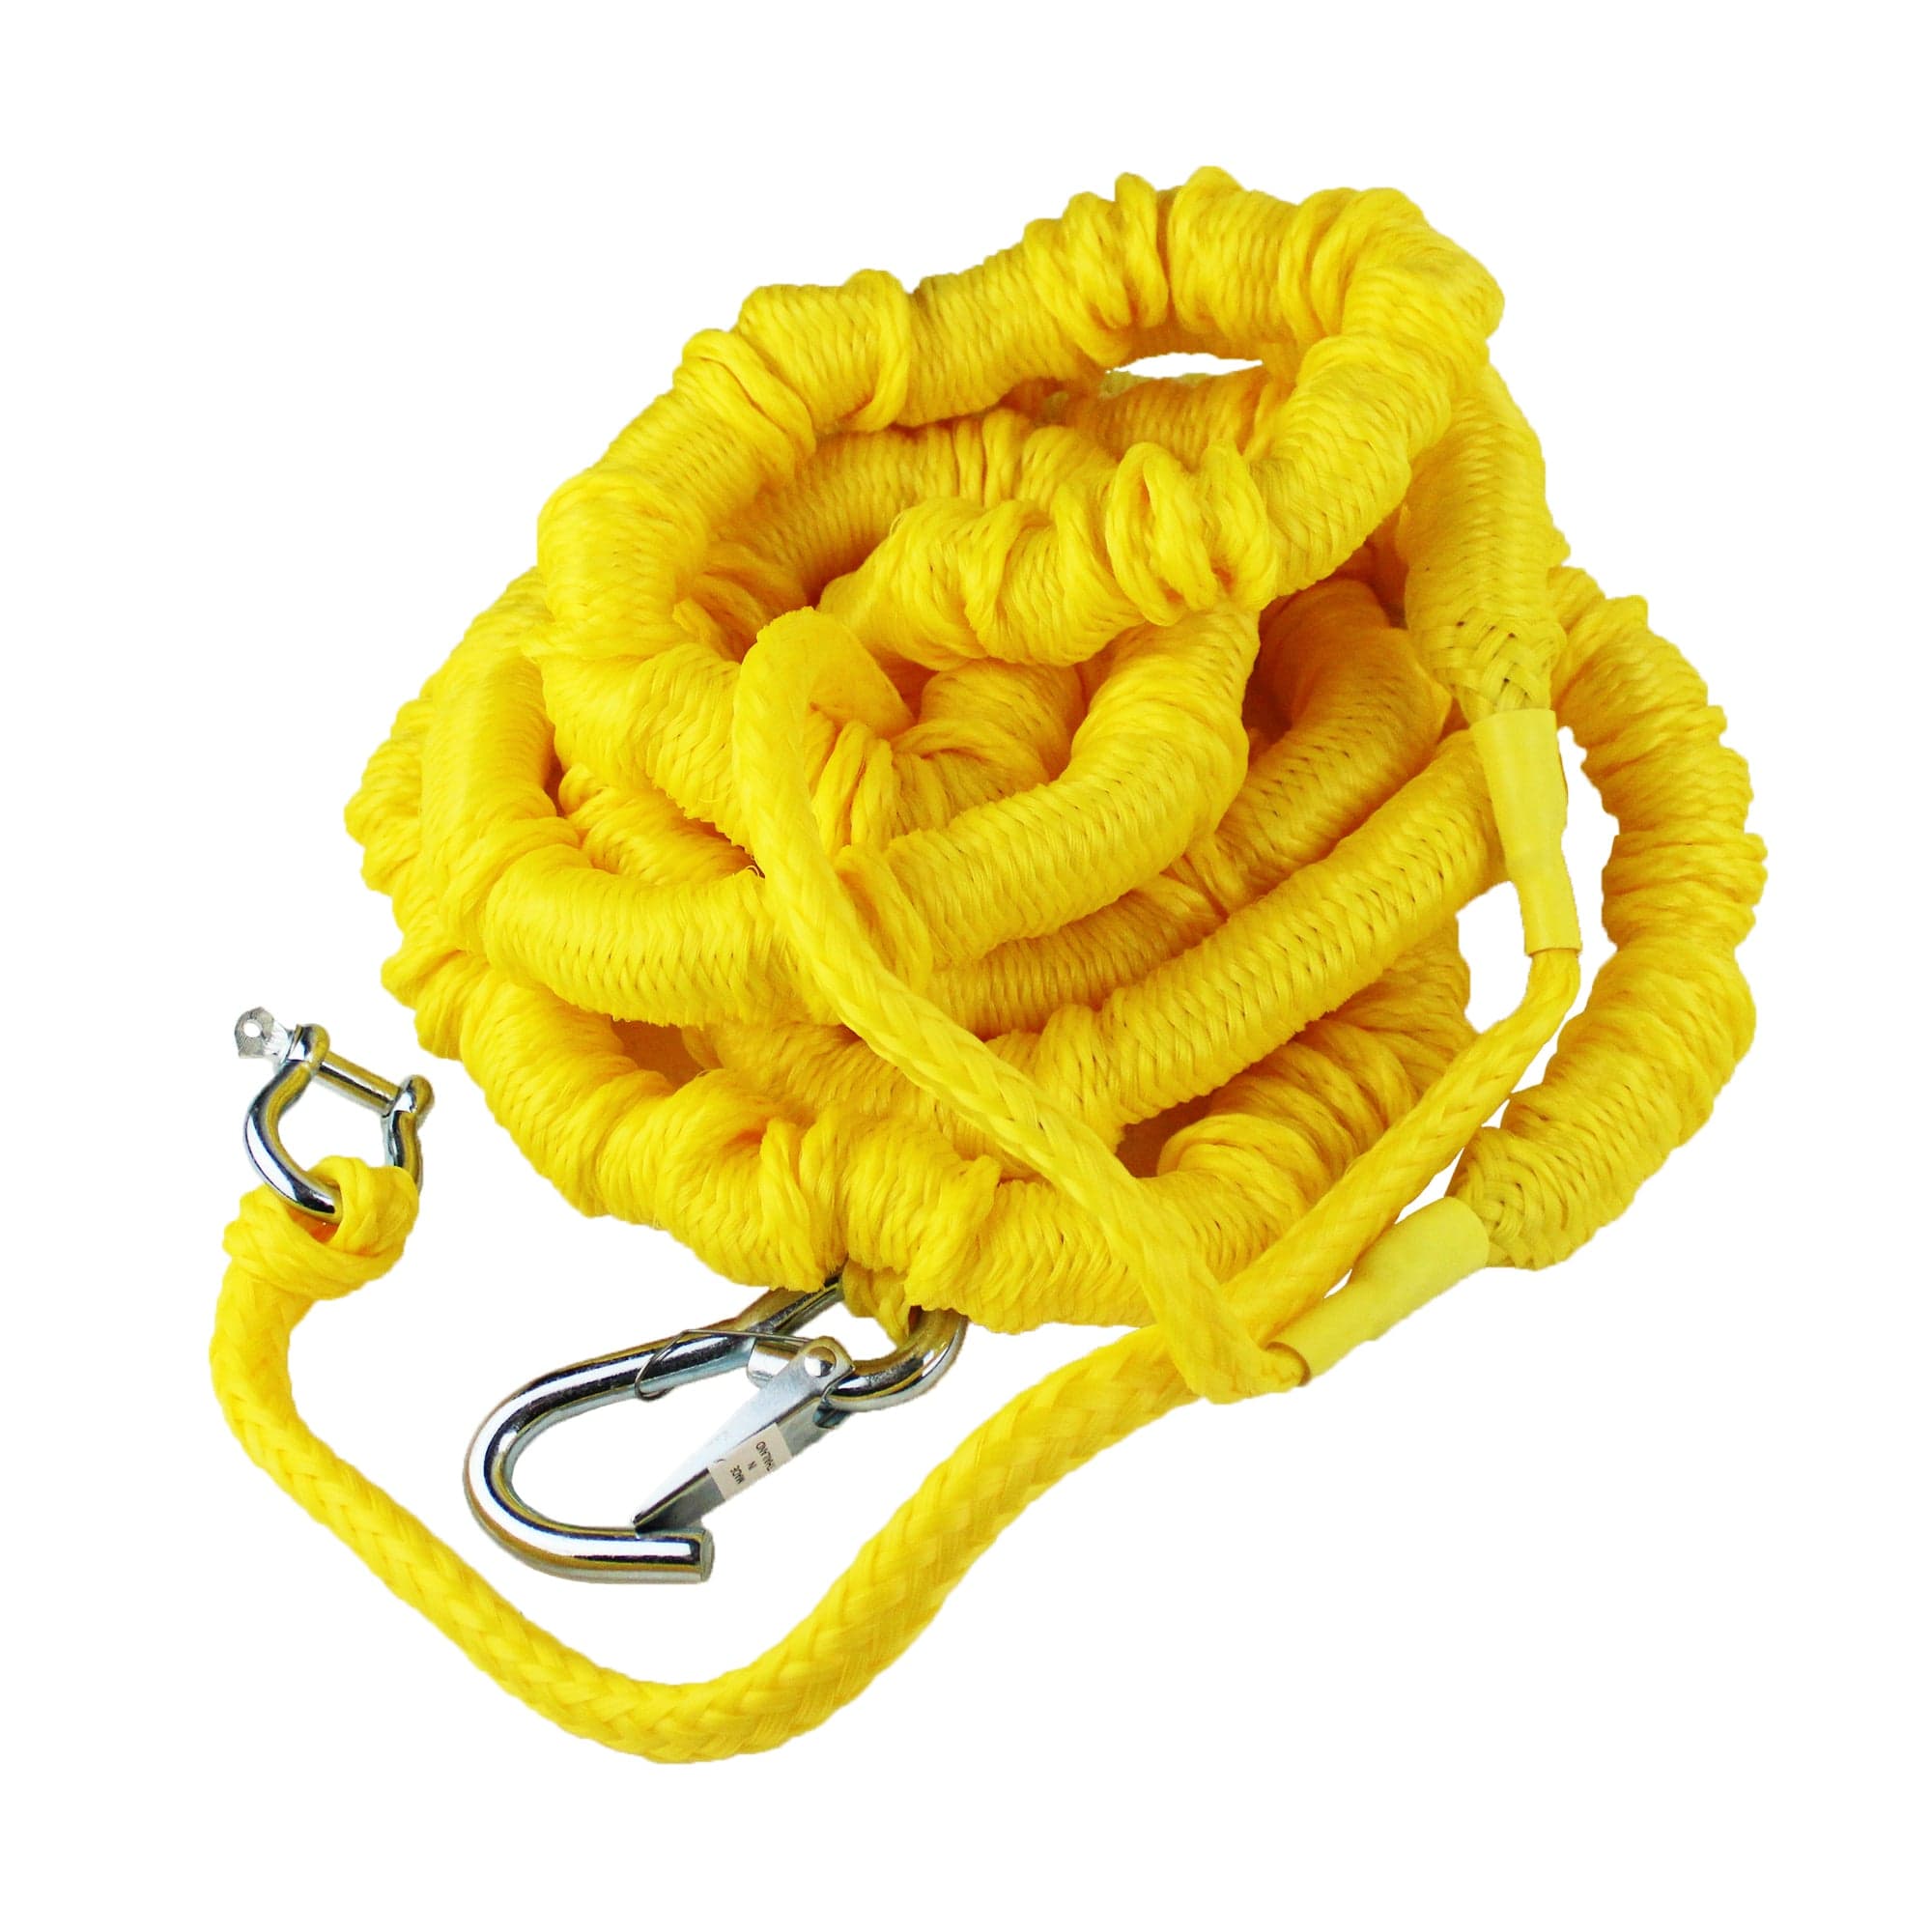 Greenfield AB4000-Y Anchor Buddy Bungee Cord, 14-50 Ft. - Yellow